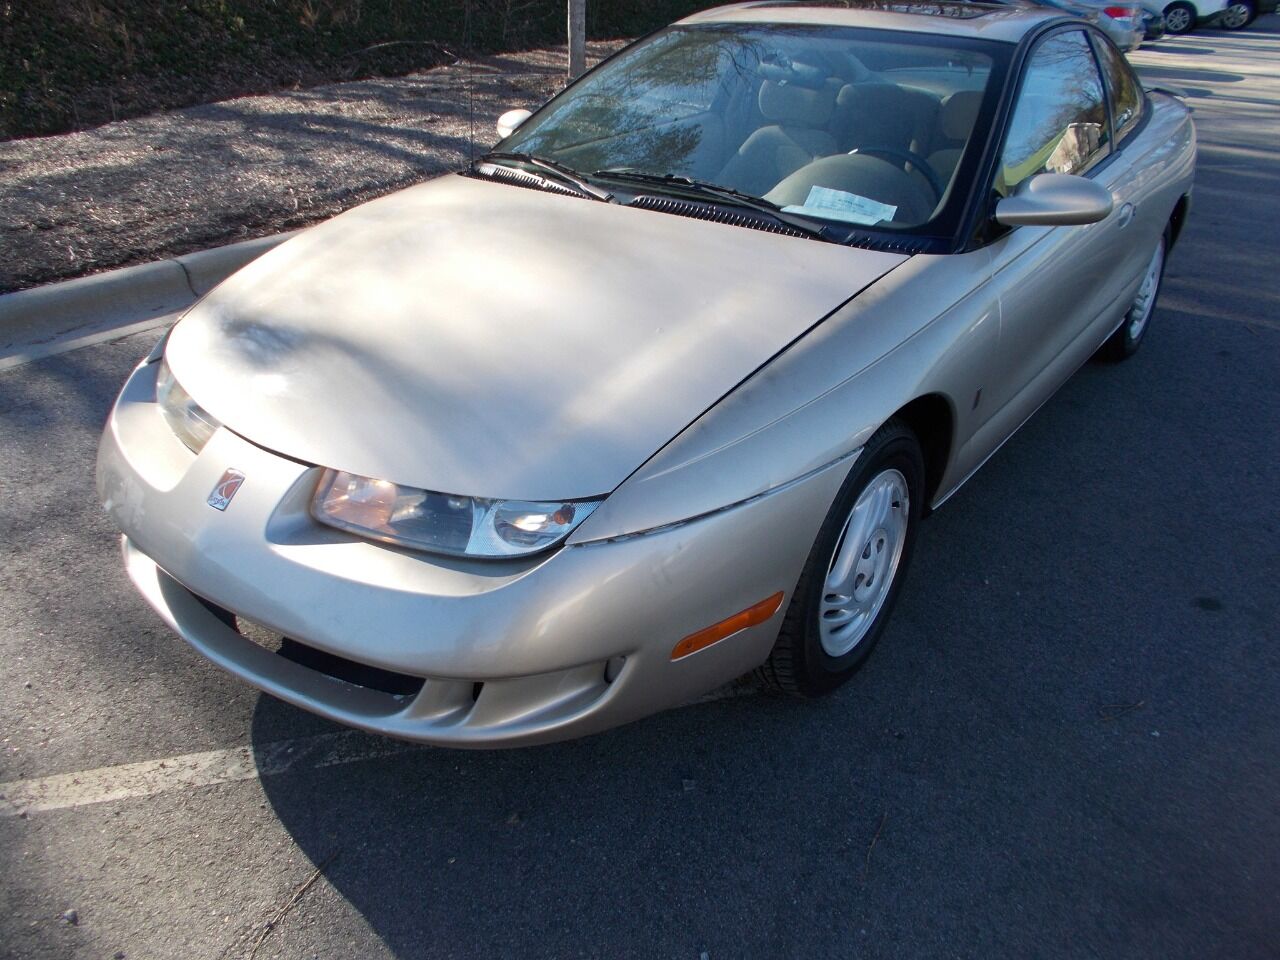 Saturn S-Series For Sale - Carsforsale.com®